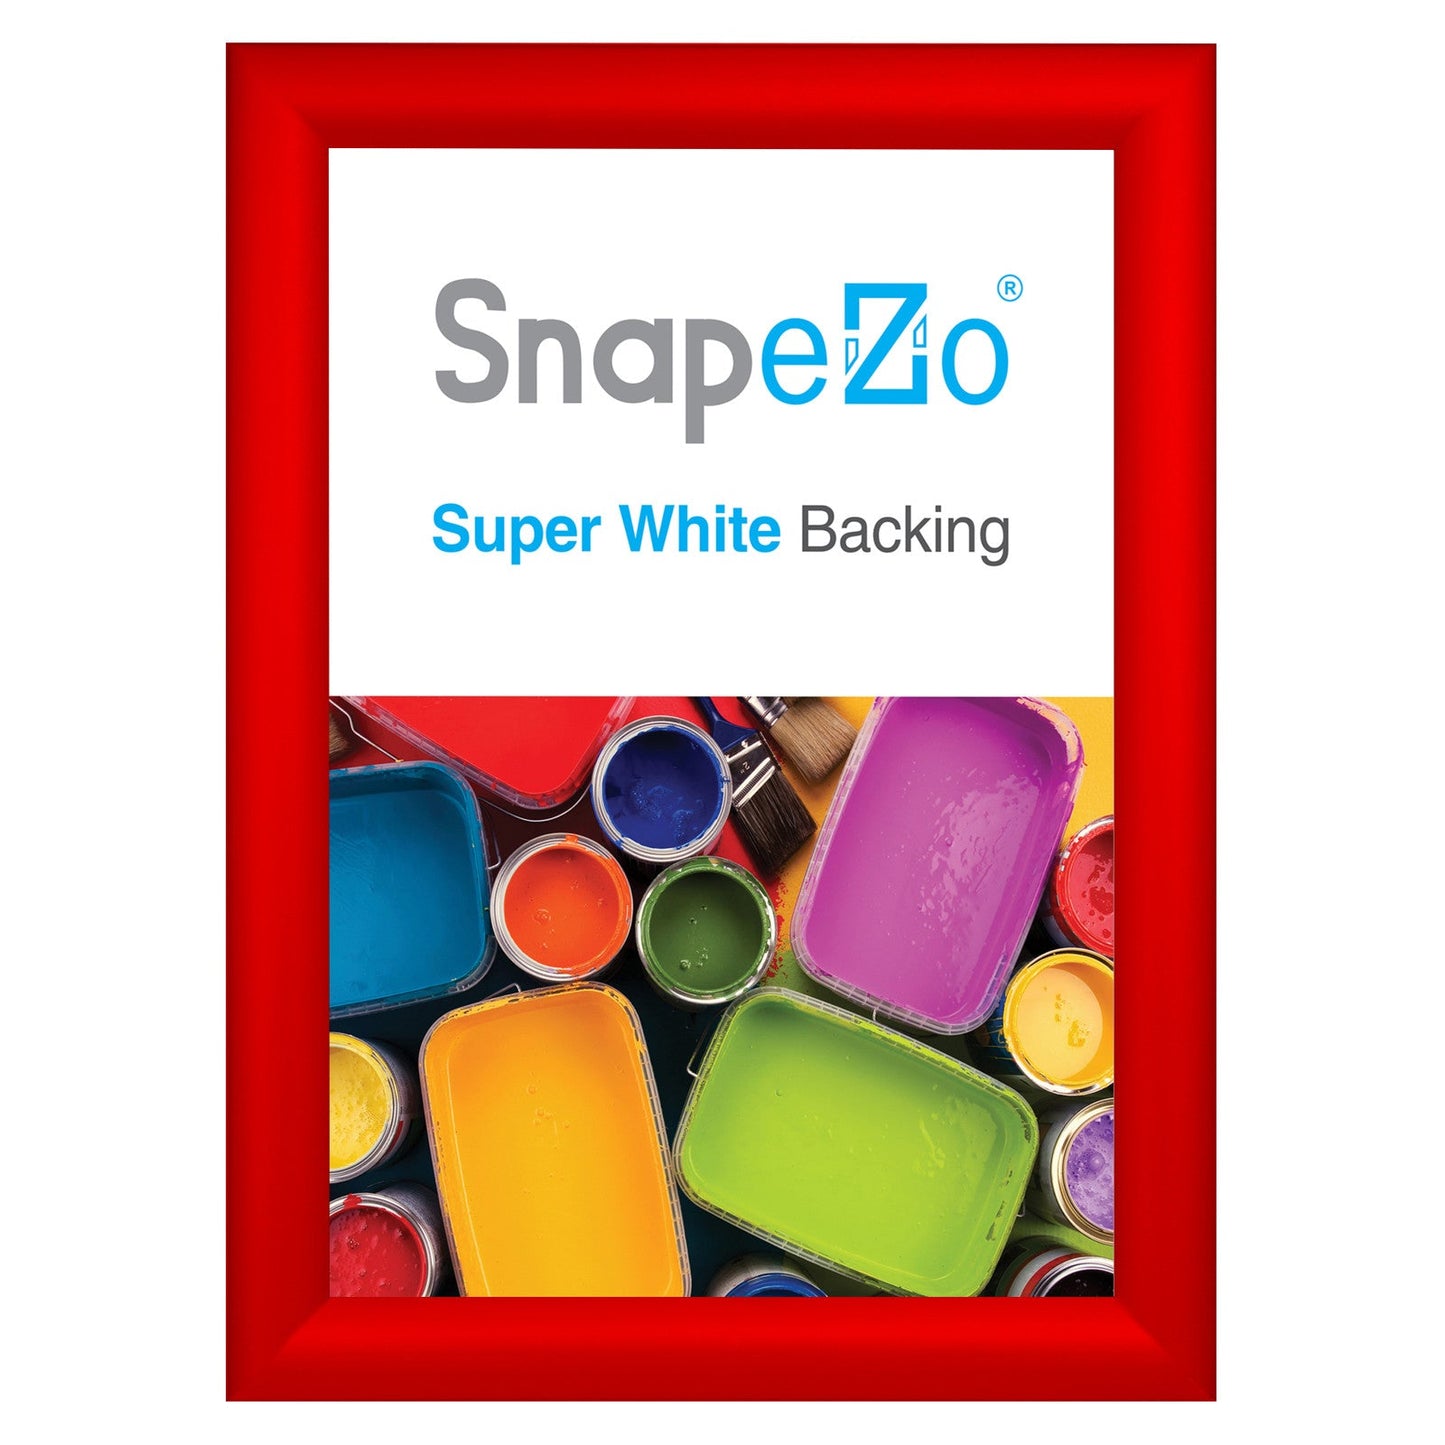 11x15 Red SnapeZo® Snap Frame - 1.2" Profile